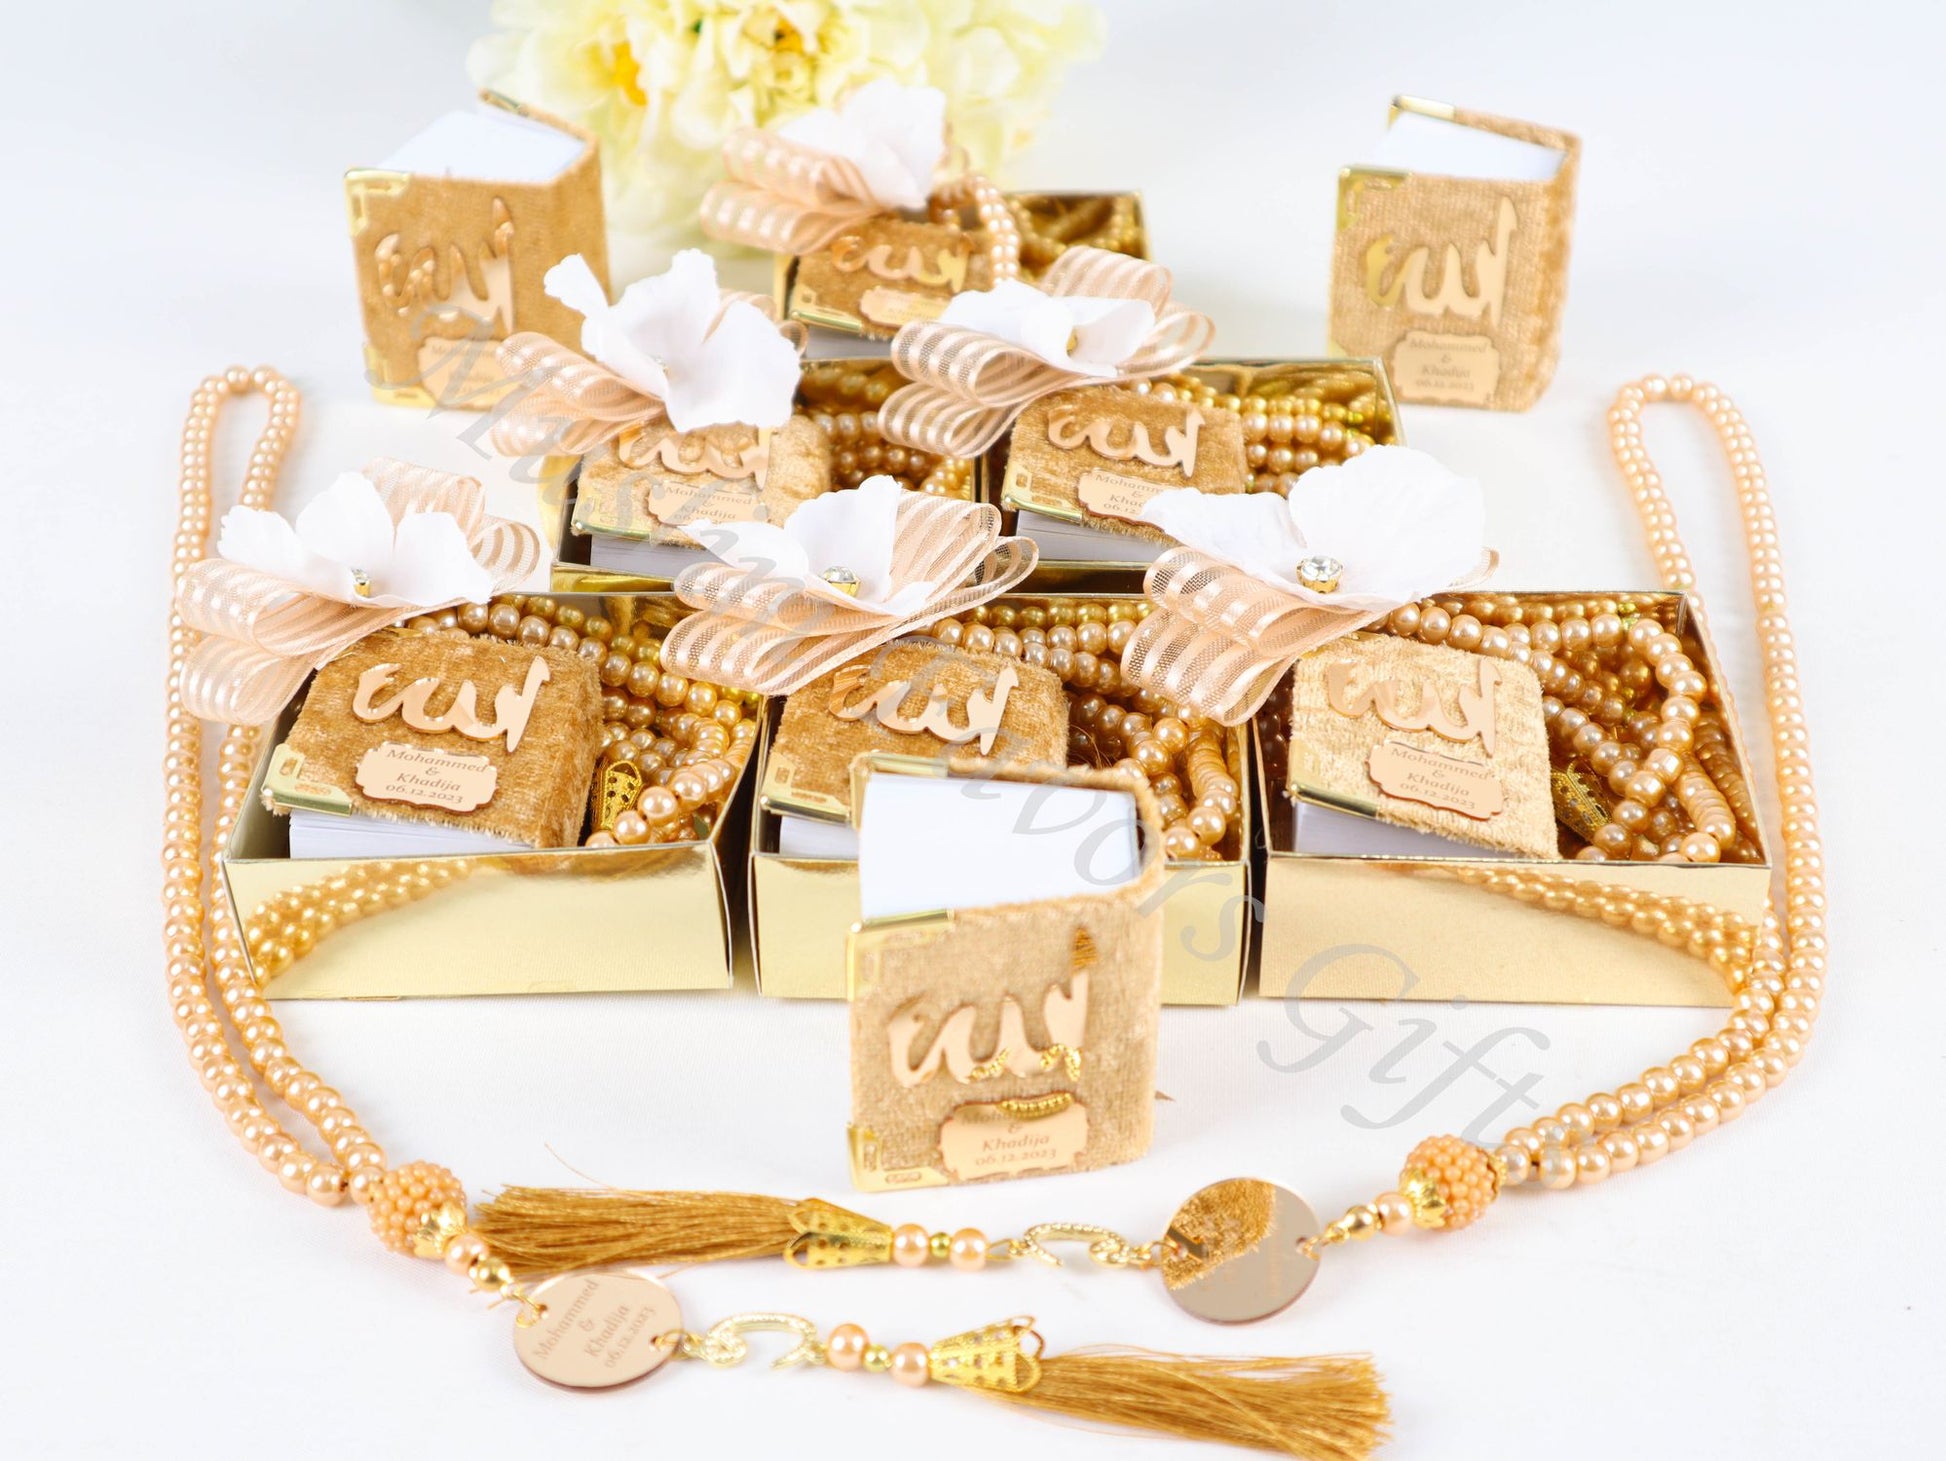 Personalized Mini Quran Pearl Prayer Beads Rose Décor Wedding Favor - Islamic Elite Favors is a handmade gift shop offering a wide variety of unique and personalized gifts for all occasions. Whether you're looking for the perfect Ramadan, Eid, Hajj, wedding gift or something special for a birthday, baby shower or anniversary, we have something for everyone. High quality, made with love.